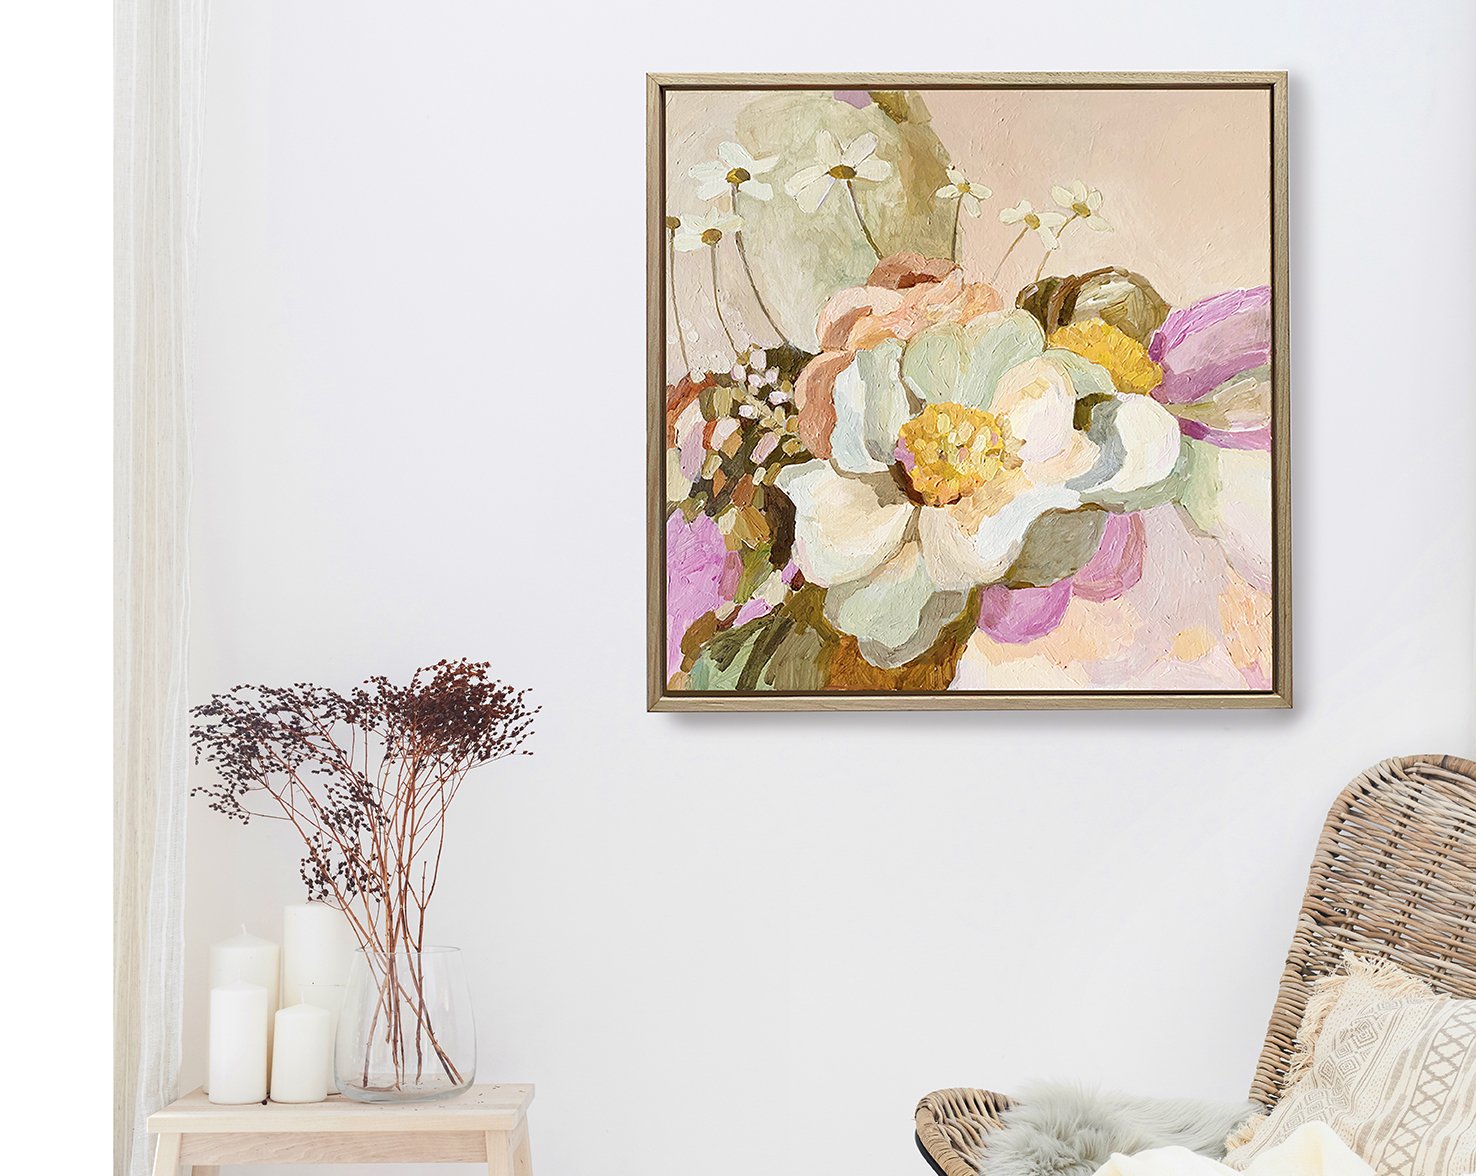 Jade Fisher | Abstract Botanical paintings & prints